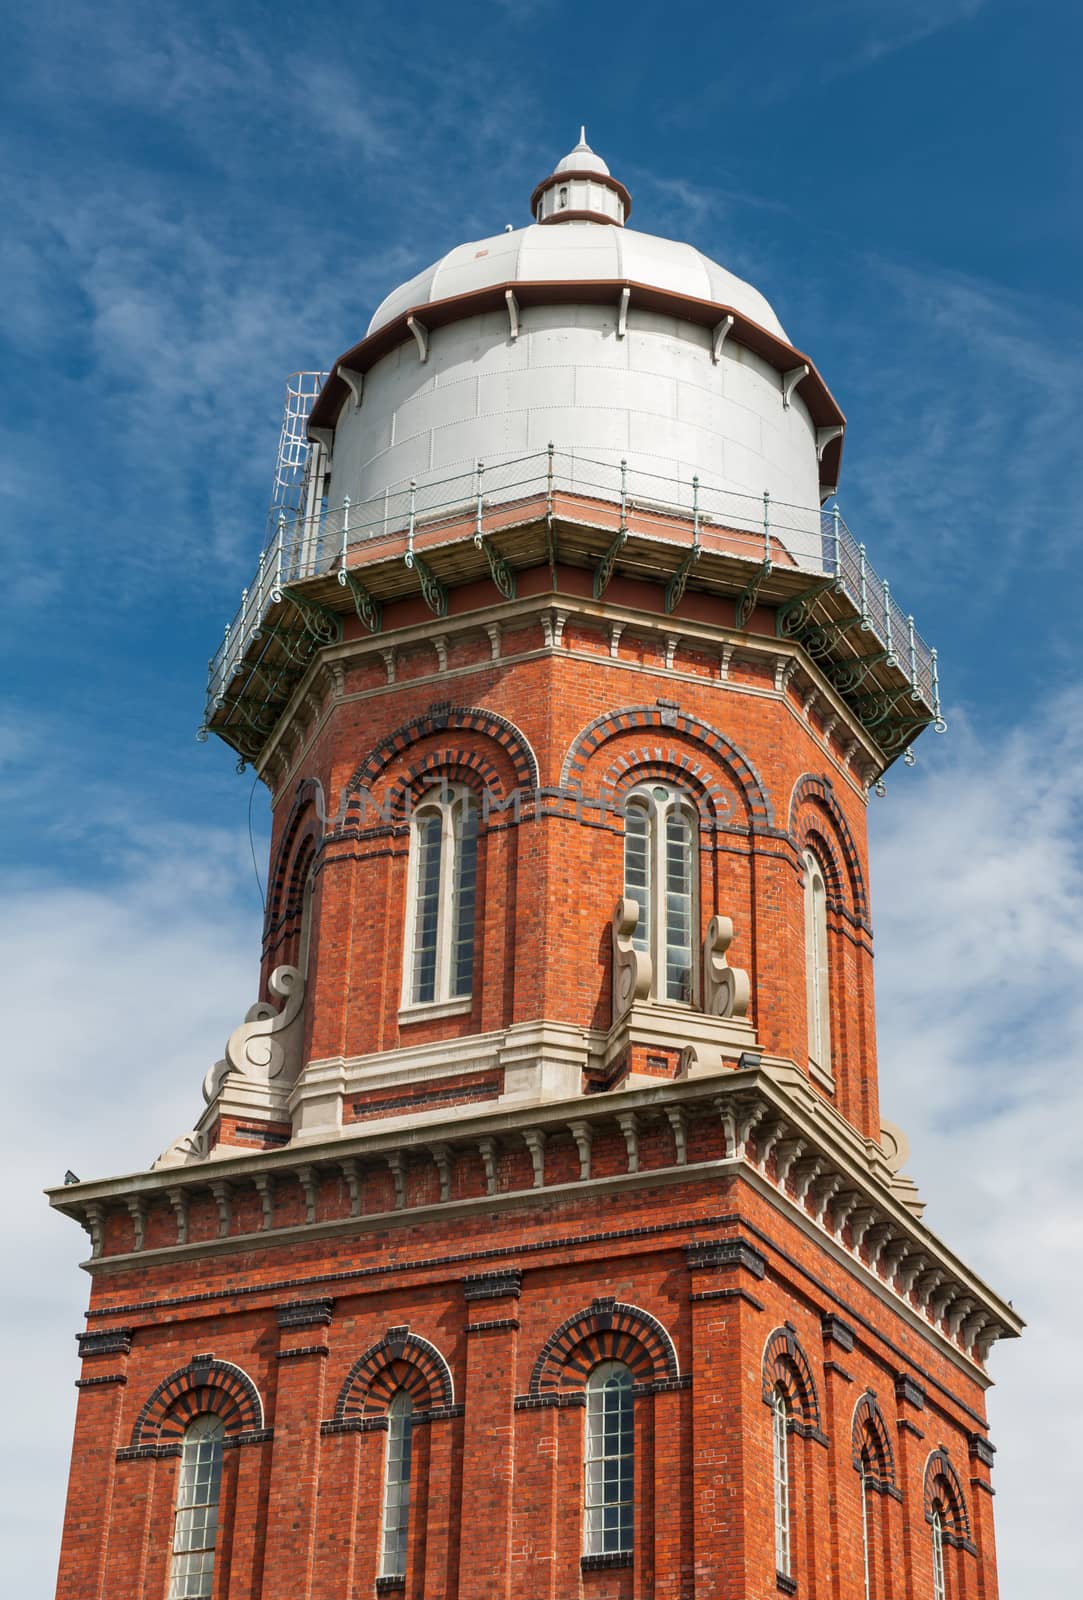 Historical Water Tower in Invercargill, the southernmost city of New Zealand and centre of Southland region